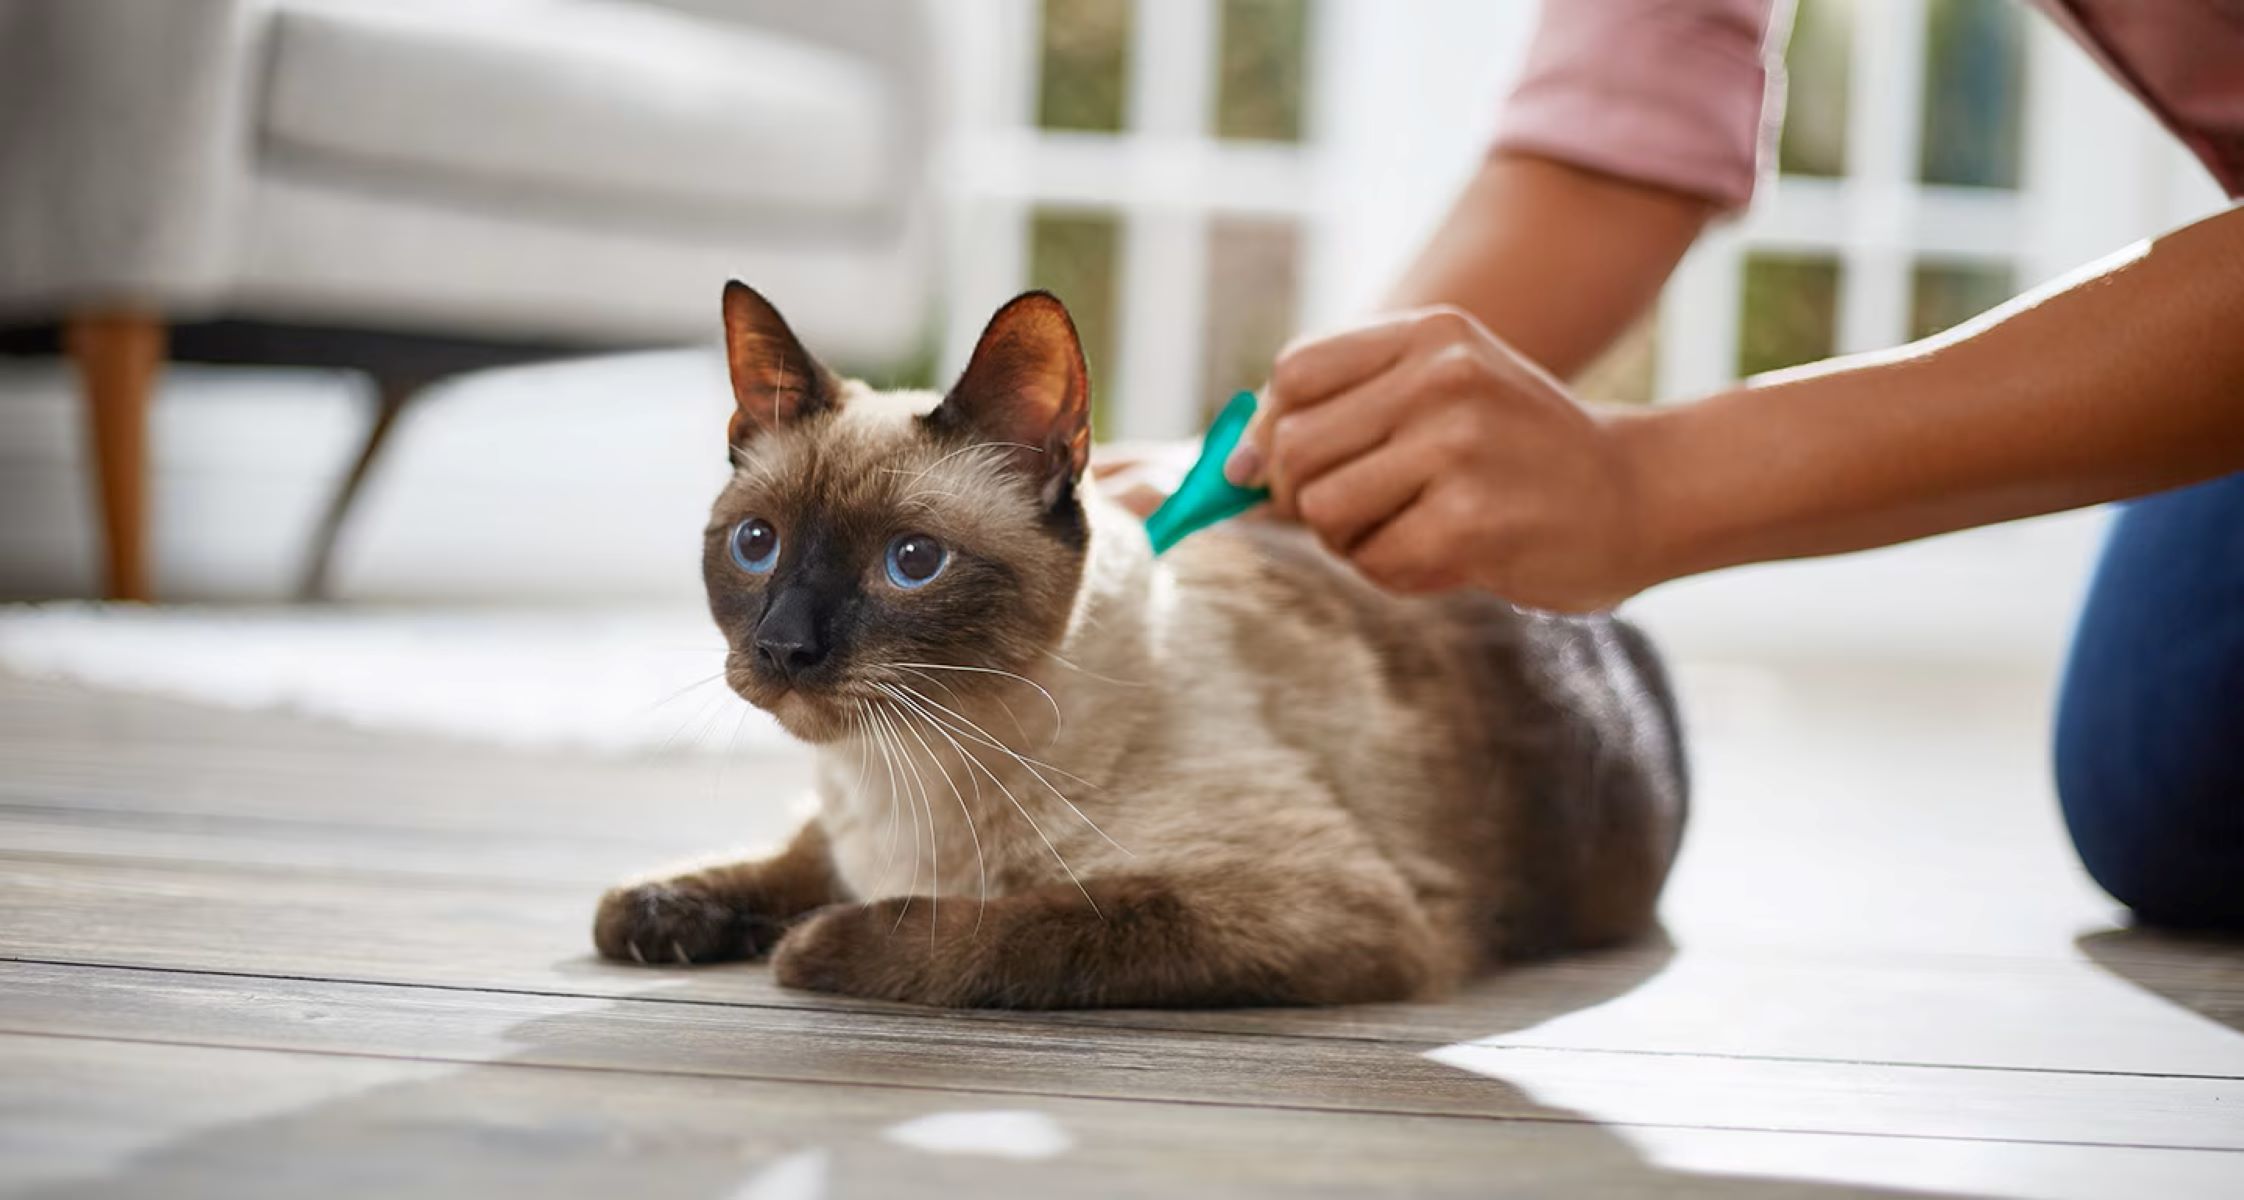 The Ultimate Guide To Applying Flea And Tick Medicine On Your Cat